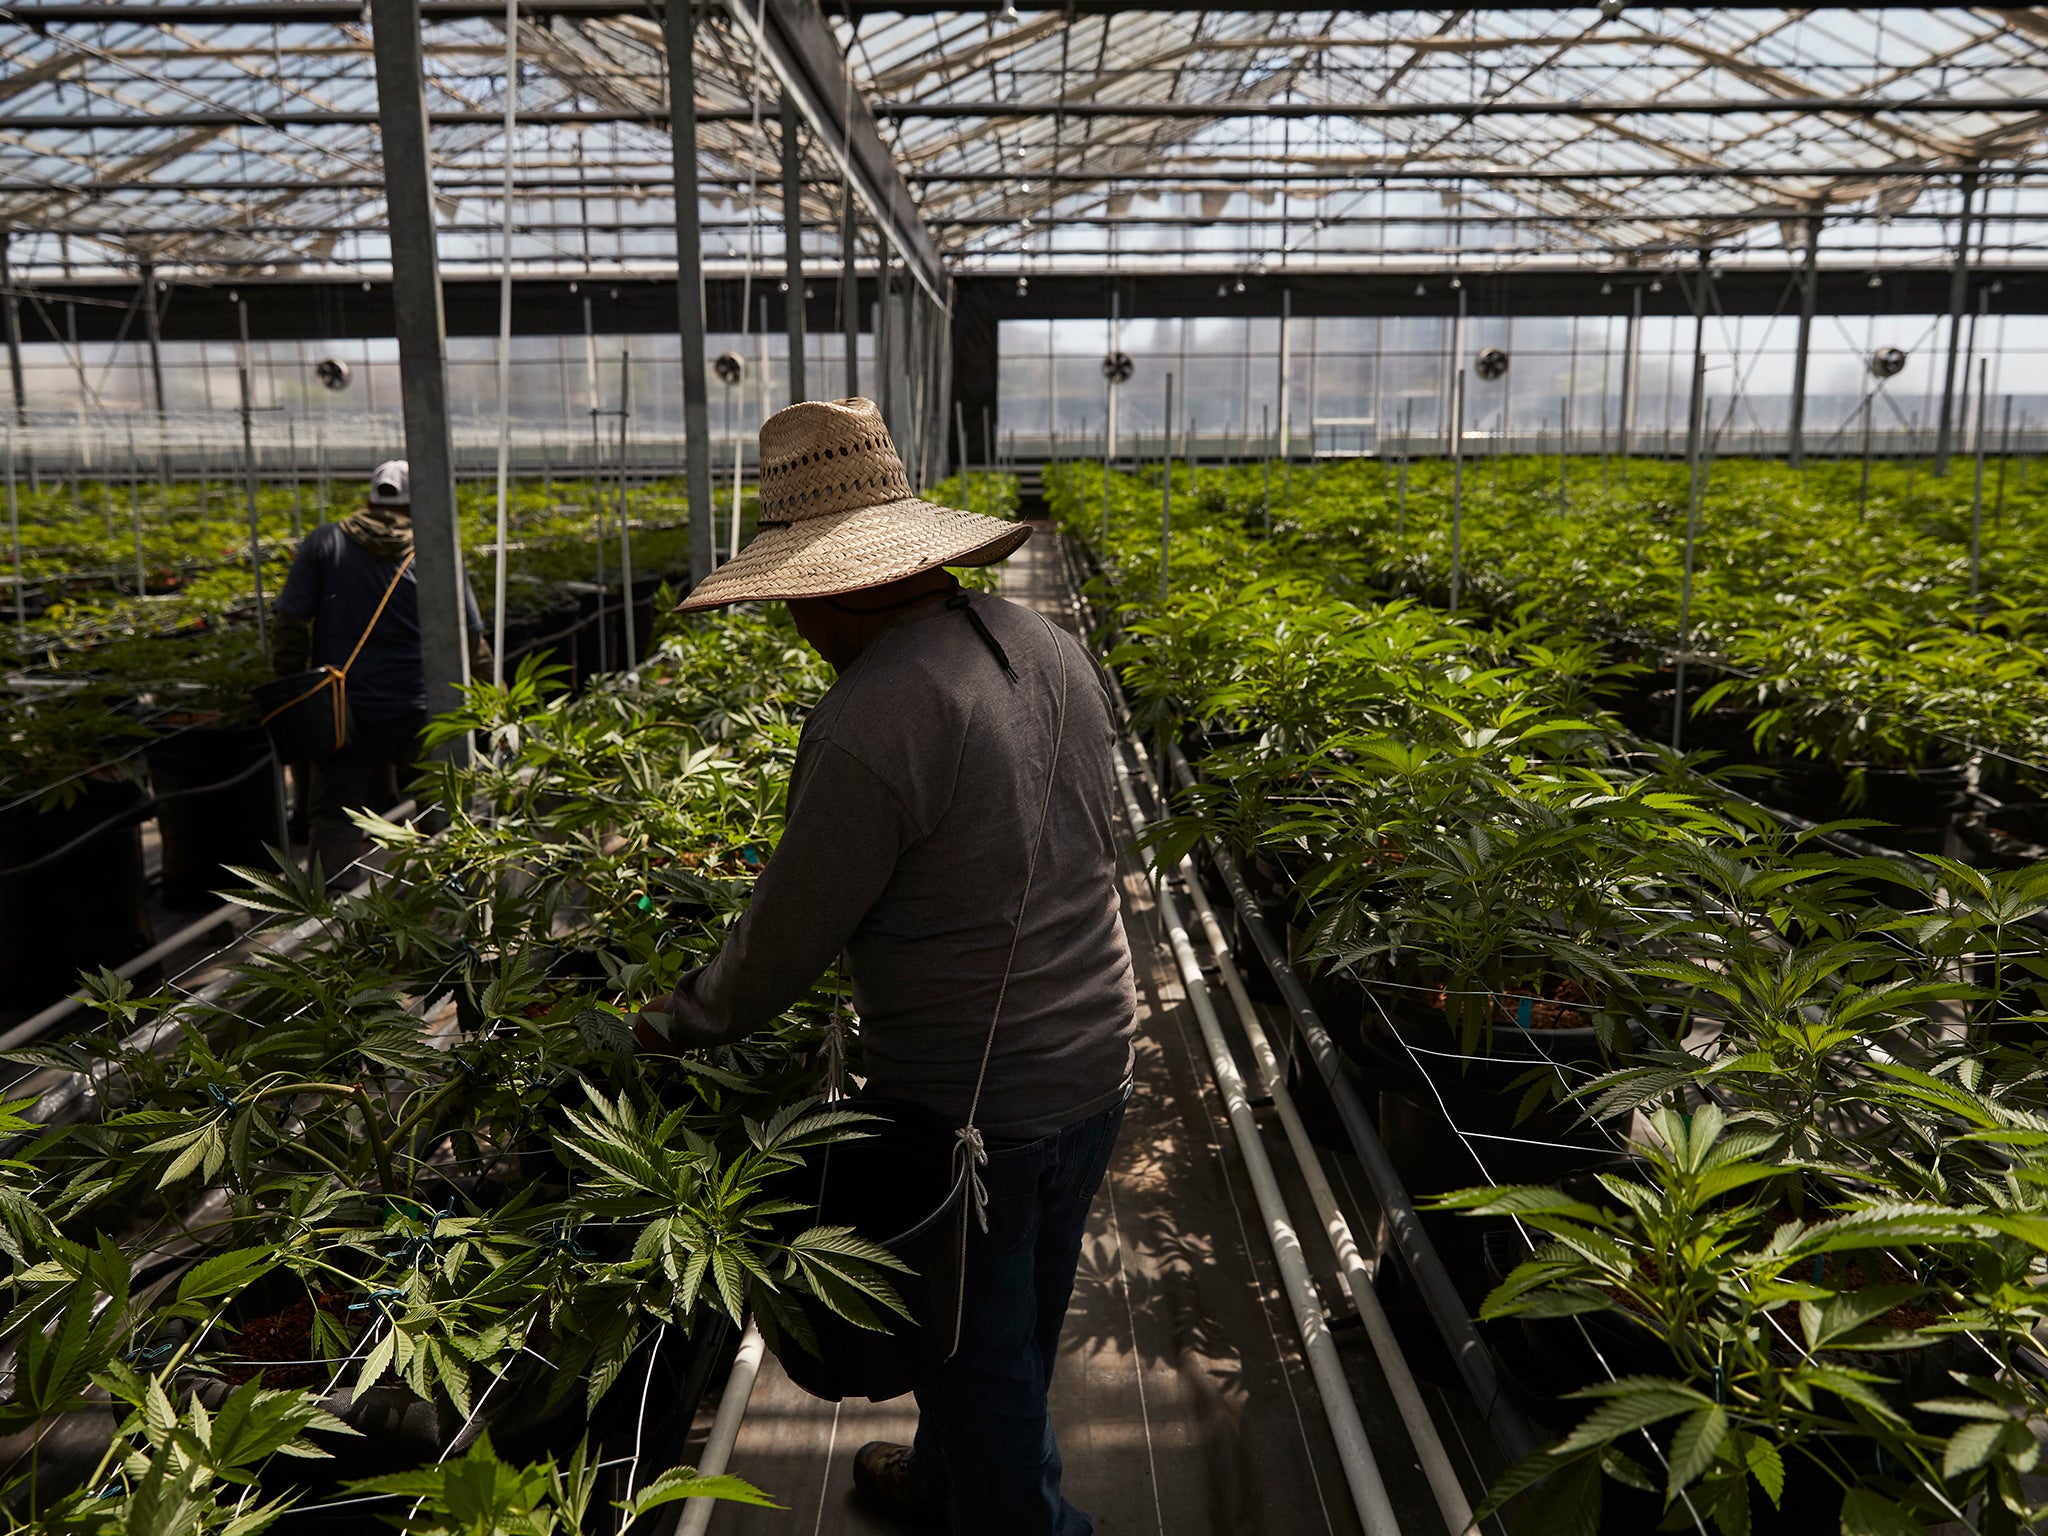 Workers in a greenhouse growing cannabis plants in Carpinteria